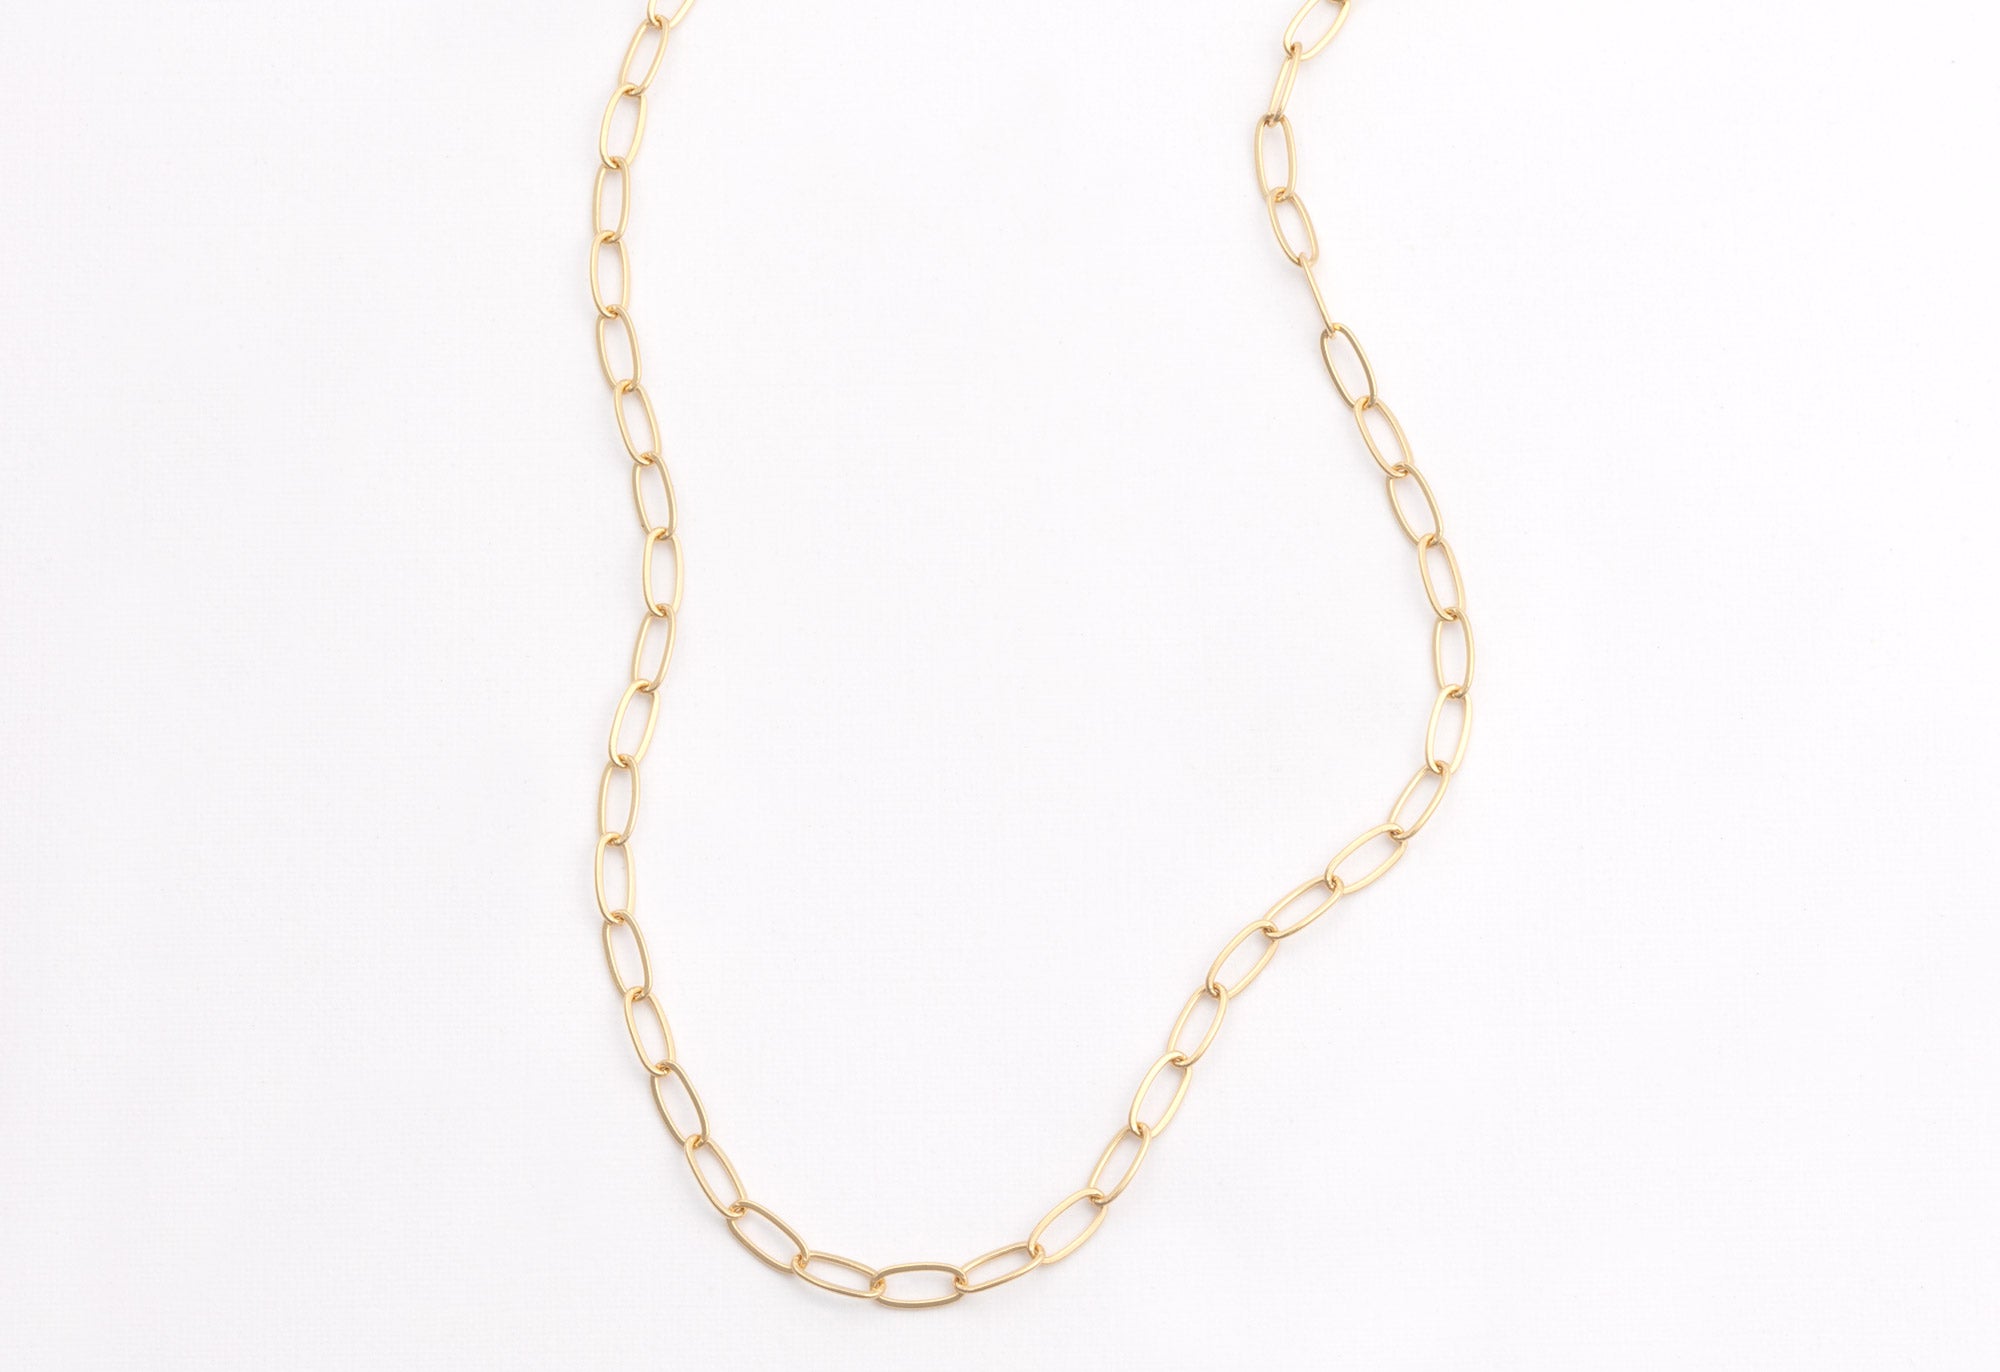 Yellow Gold The Drawn Cable Chain Charm Necklace on White Background